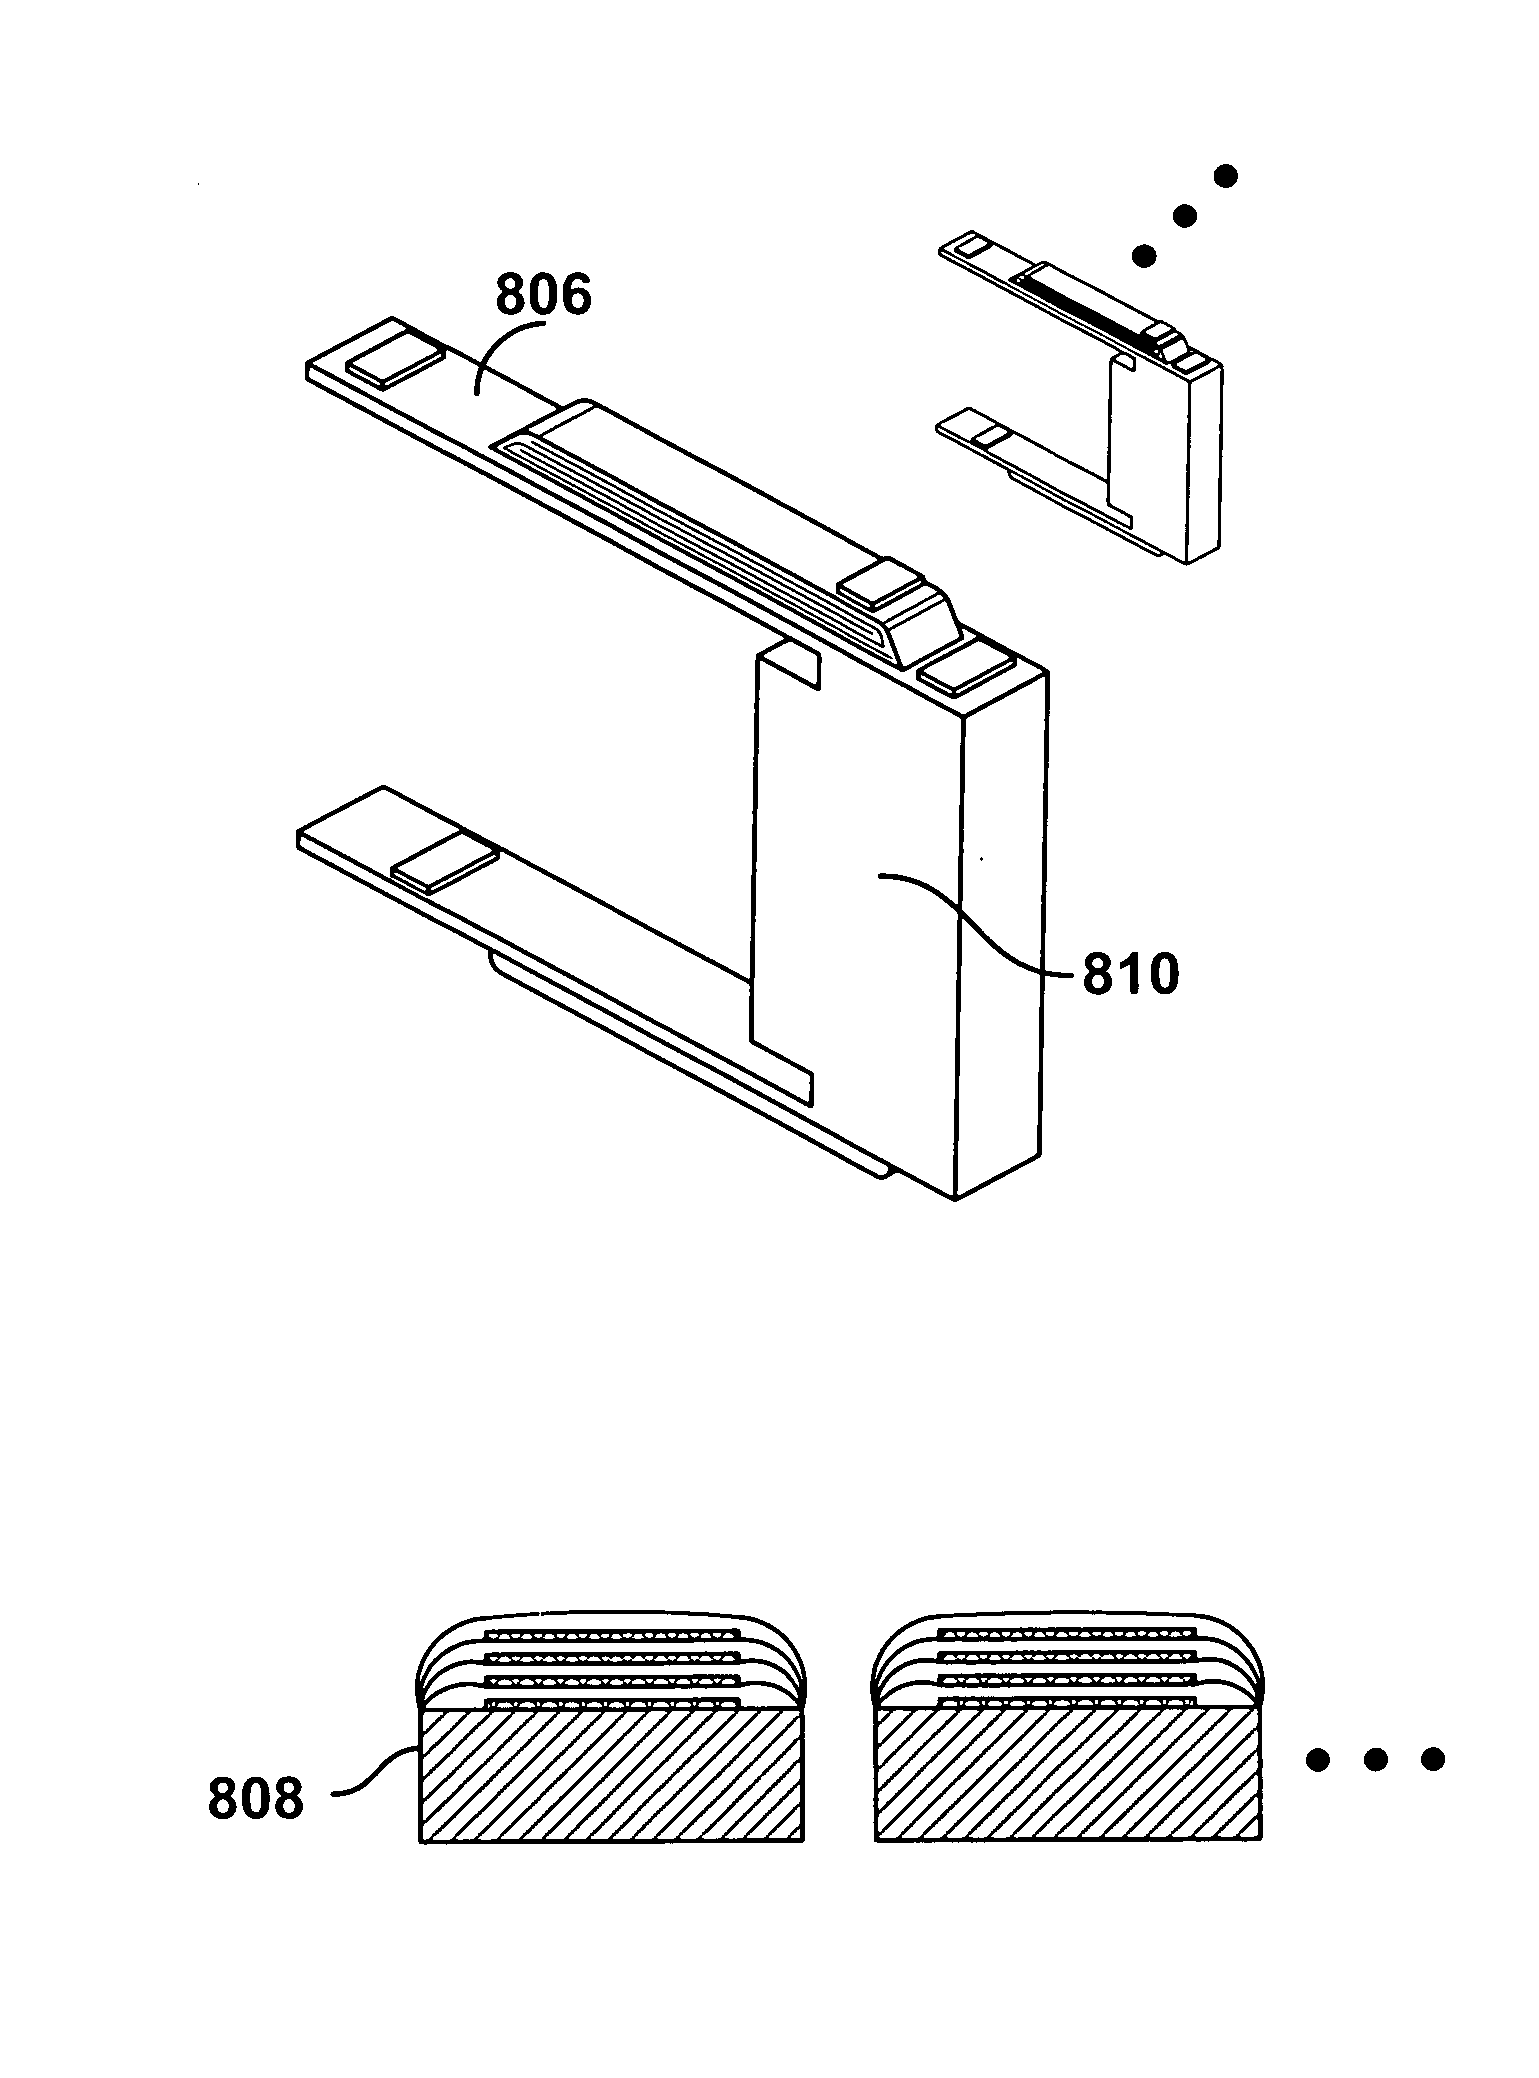 Method for preventing operational and manufacturing imperfections in piezoelectric micro-actuators